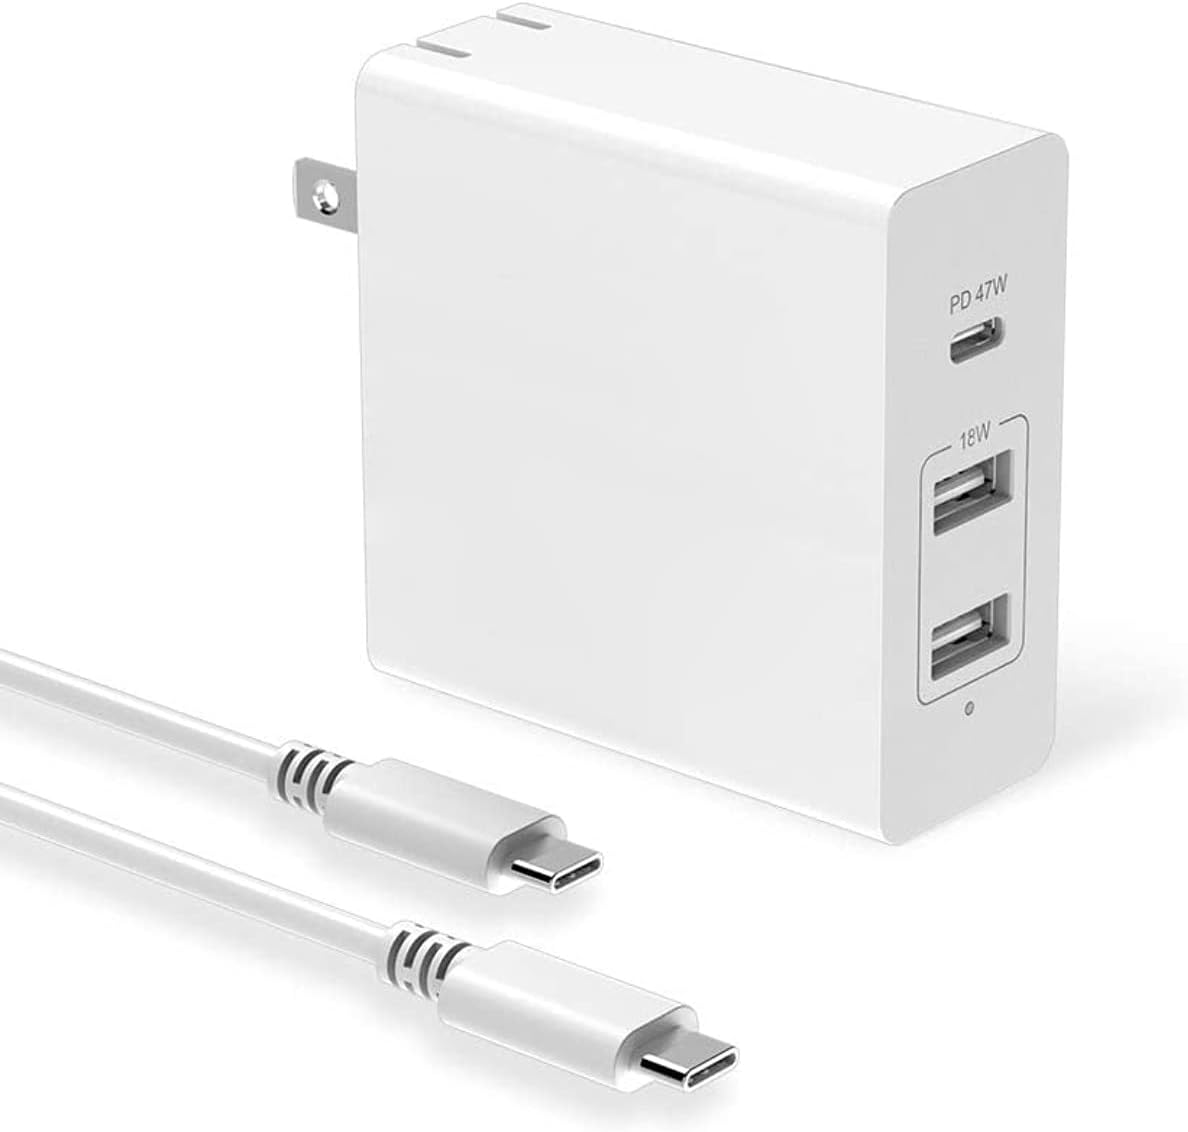 Huntkey 65W USB C Wall Charger, a 47W PD3.0 Quick Charge Port and 2-Ports USB-A Power Adapter (cUL Approved)